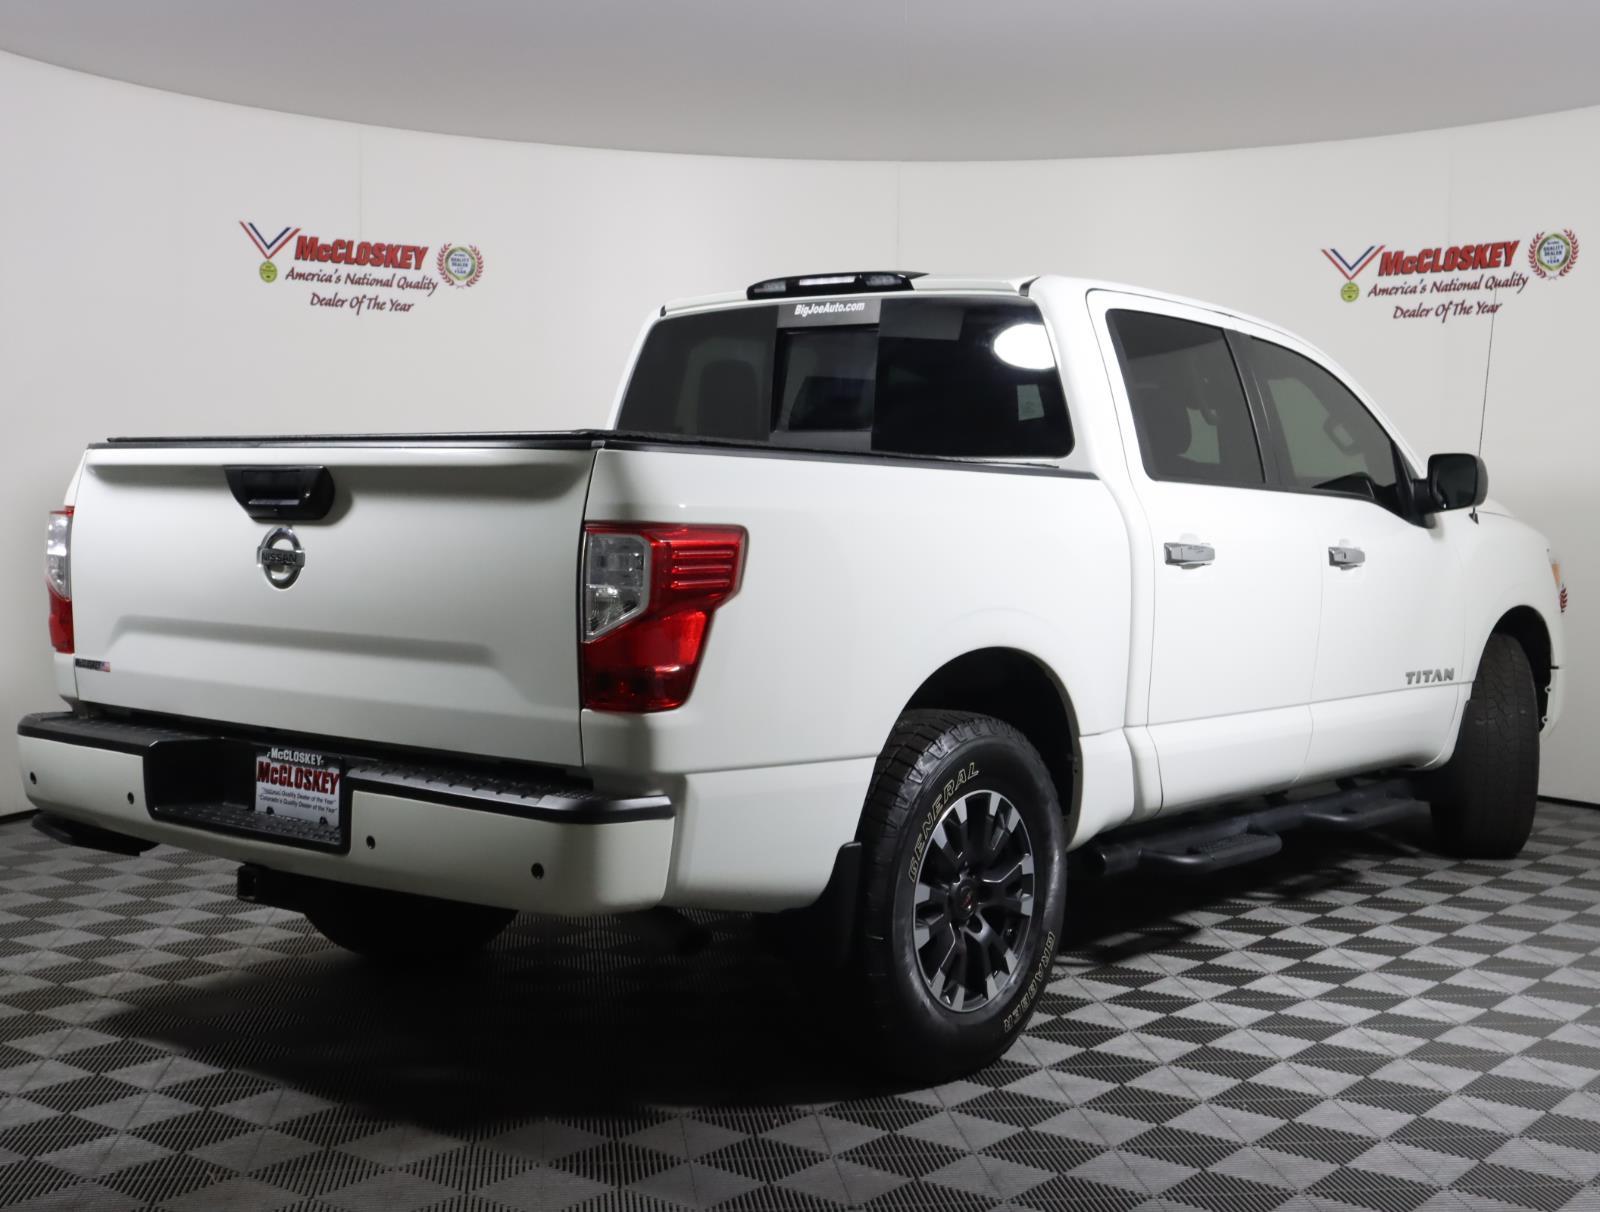 Preowned 2021 NISSAN Titan SV for sale by McCloskey Imports & 4X4's in Colorado Springs, CO